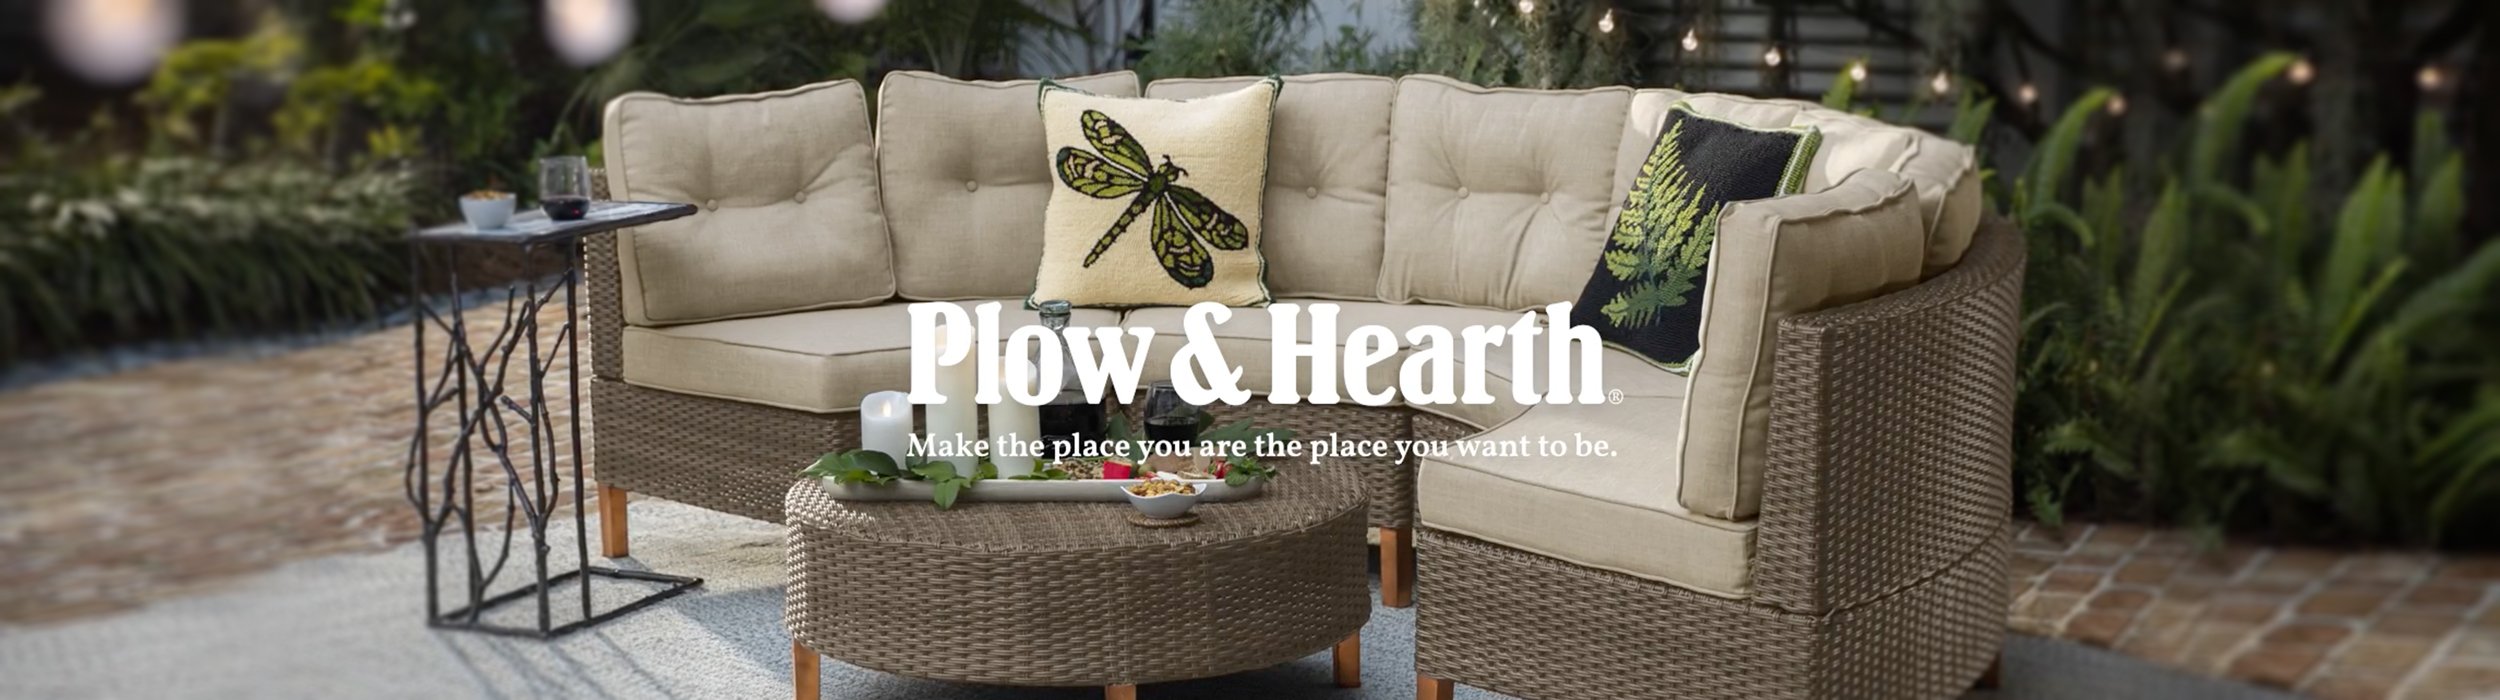 Plow & Hearth Celebrates the Comfort of Home on National TV